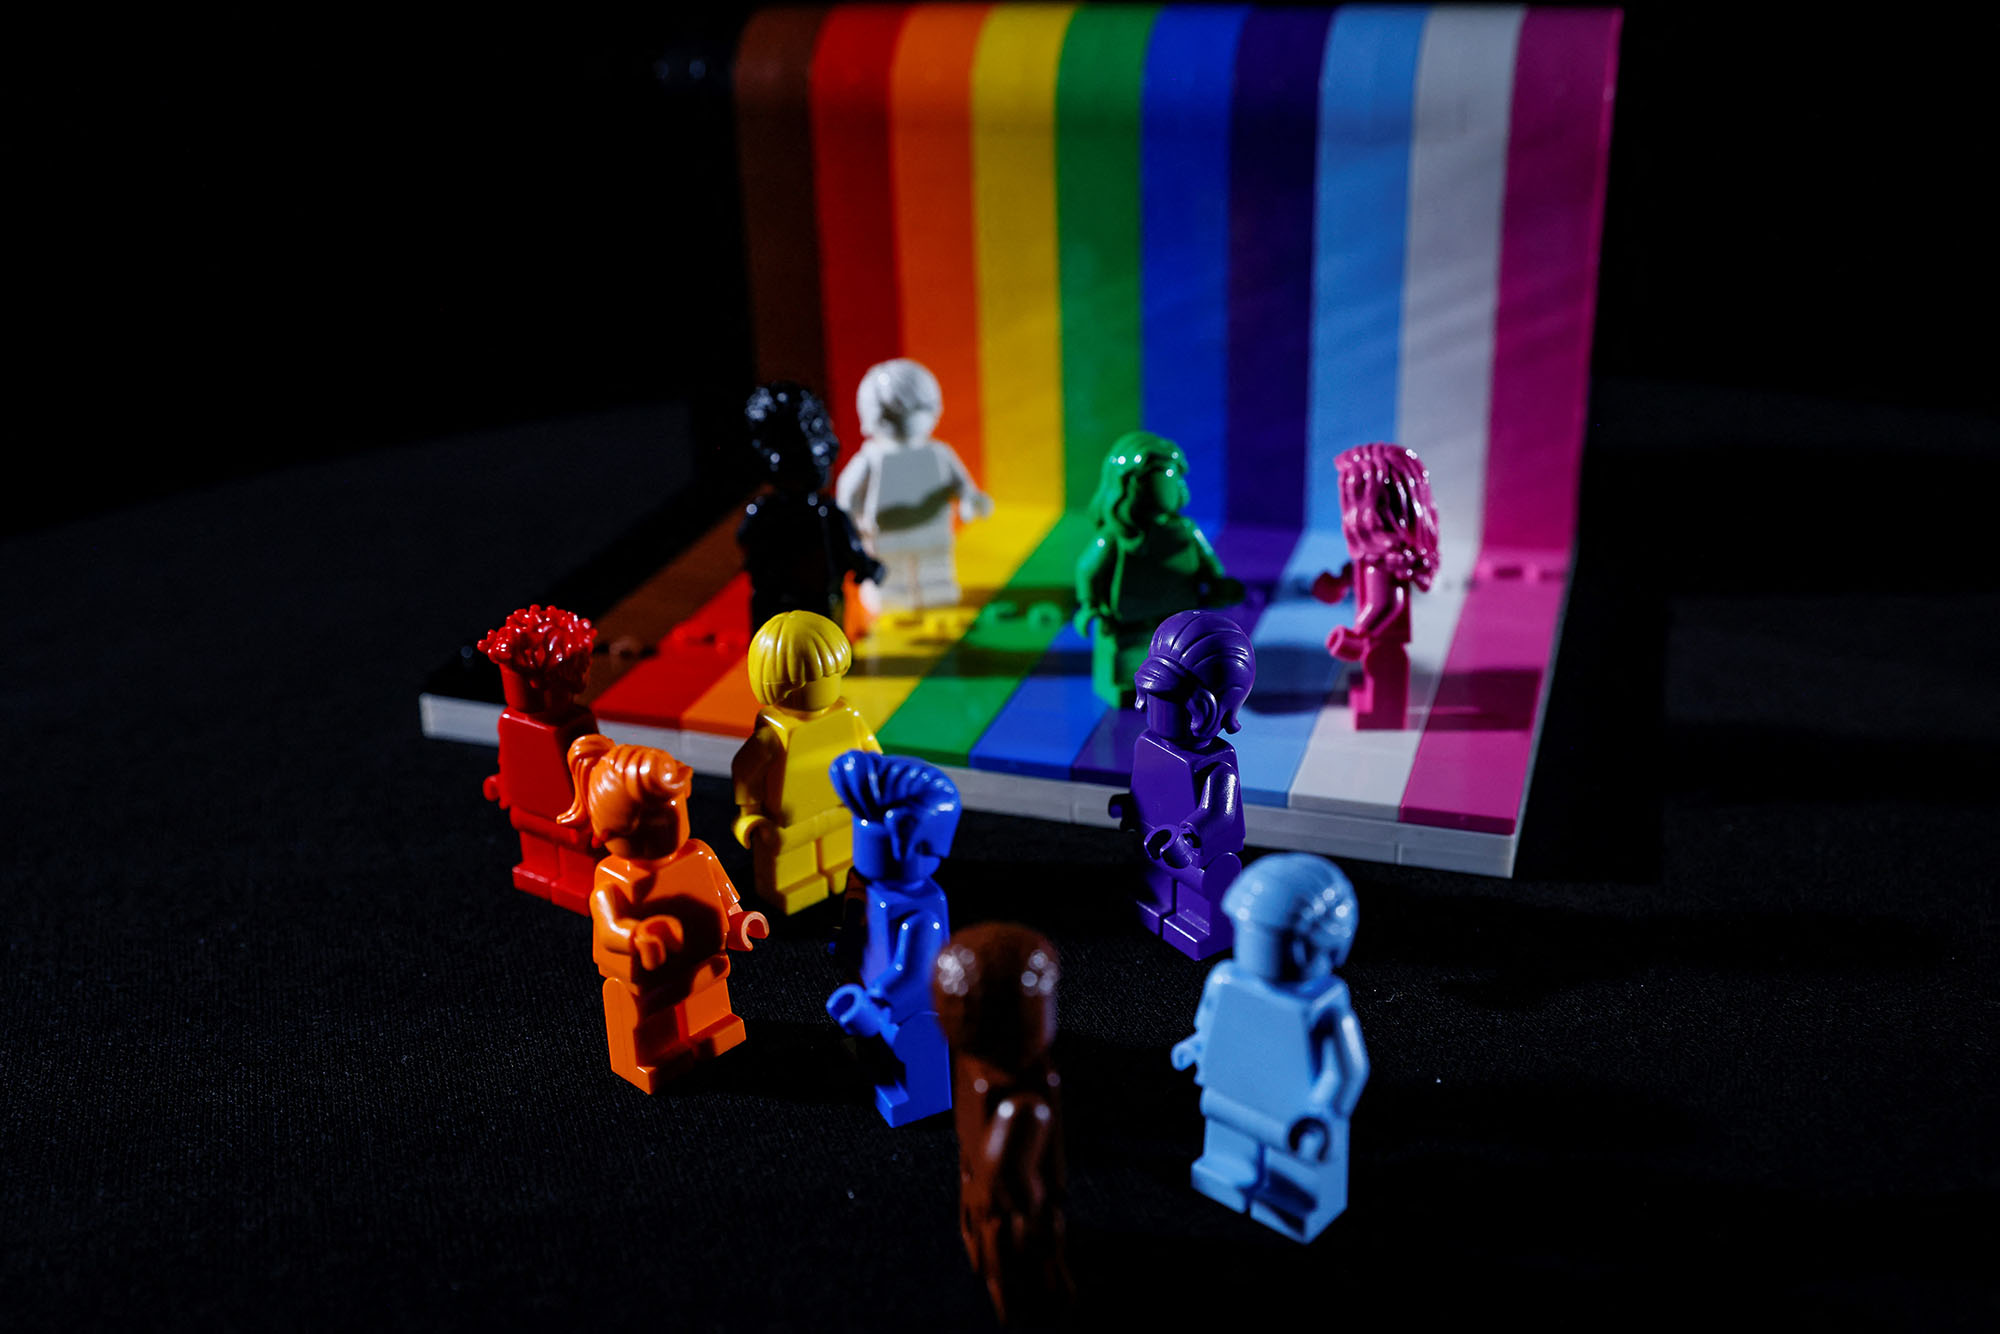 This picture taken on June 3, 2021 shows Danish toy brick maker Lego's "Everyone is Awesome" new set of rainbow-coloured figurines to celebrate the diversity of its fans and the LGBTQI+ community.